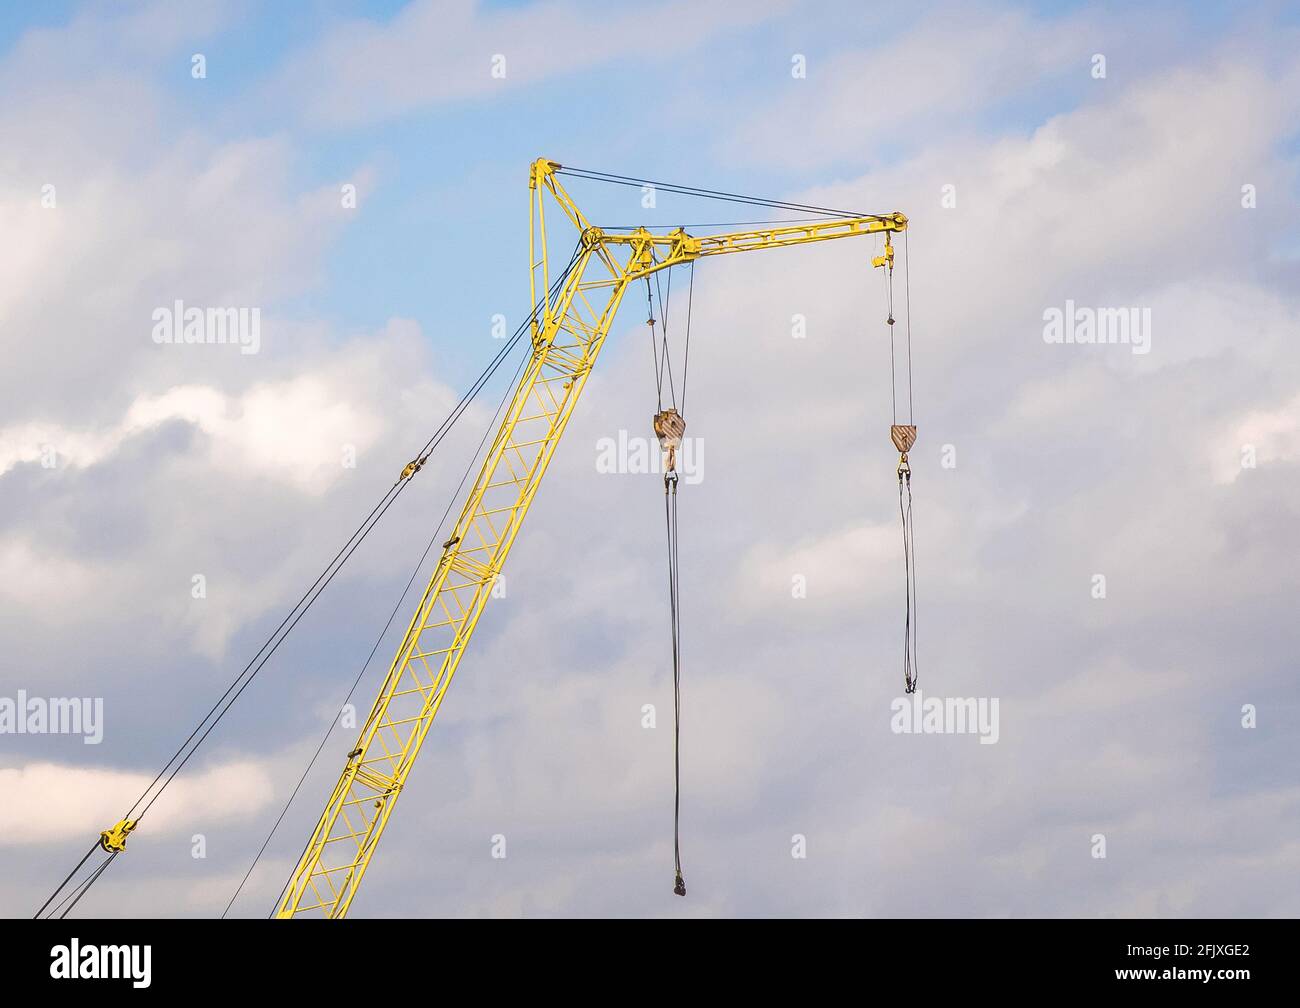 Machine industrial construction crane against the sky with clouds. Stock Photo